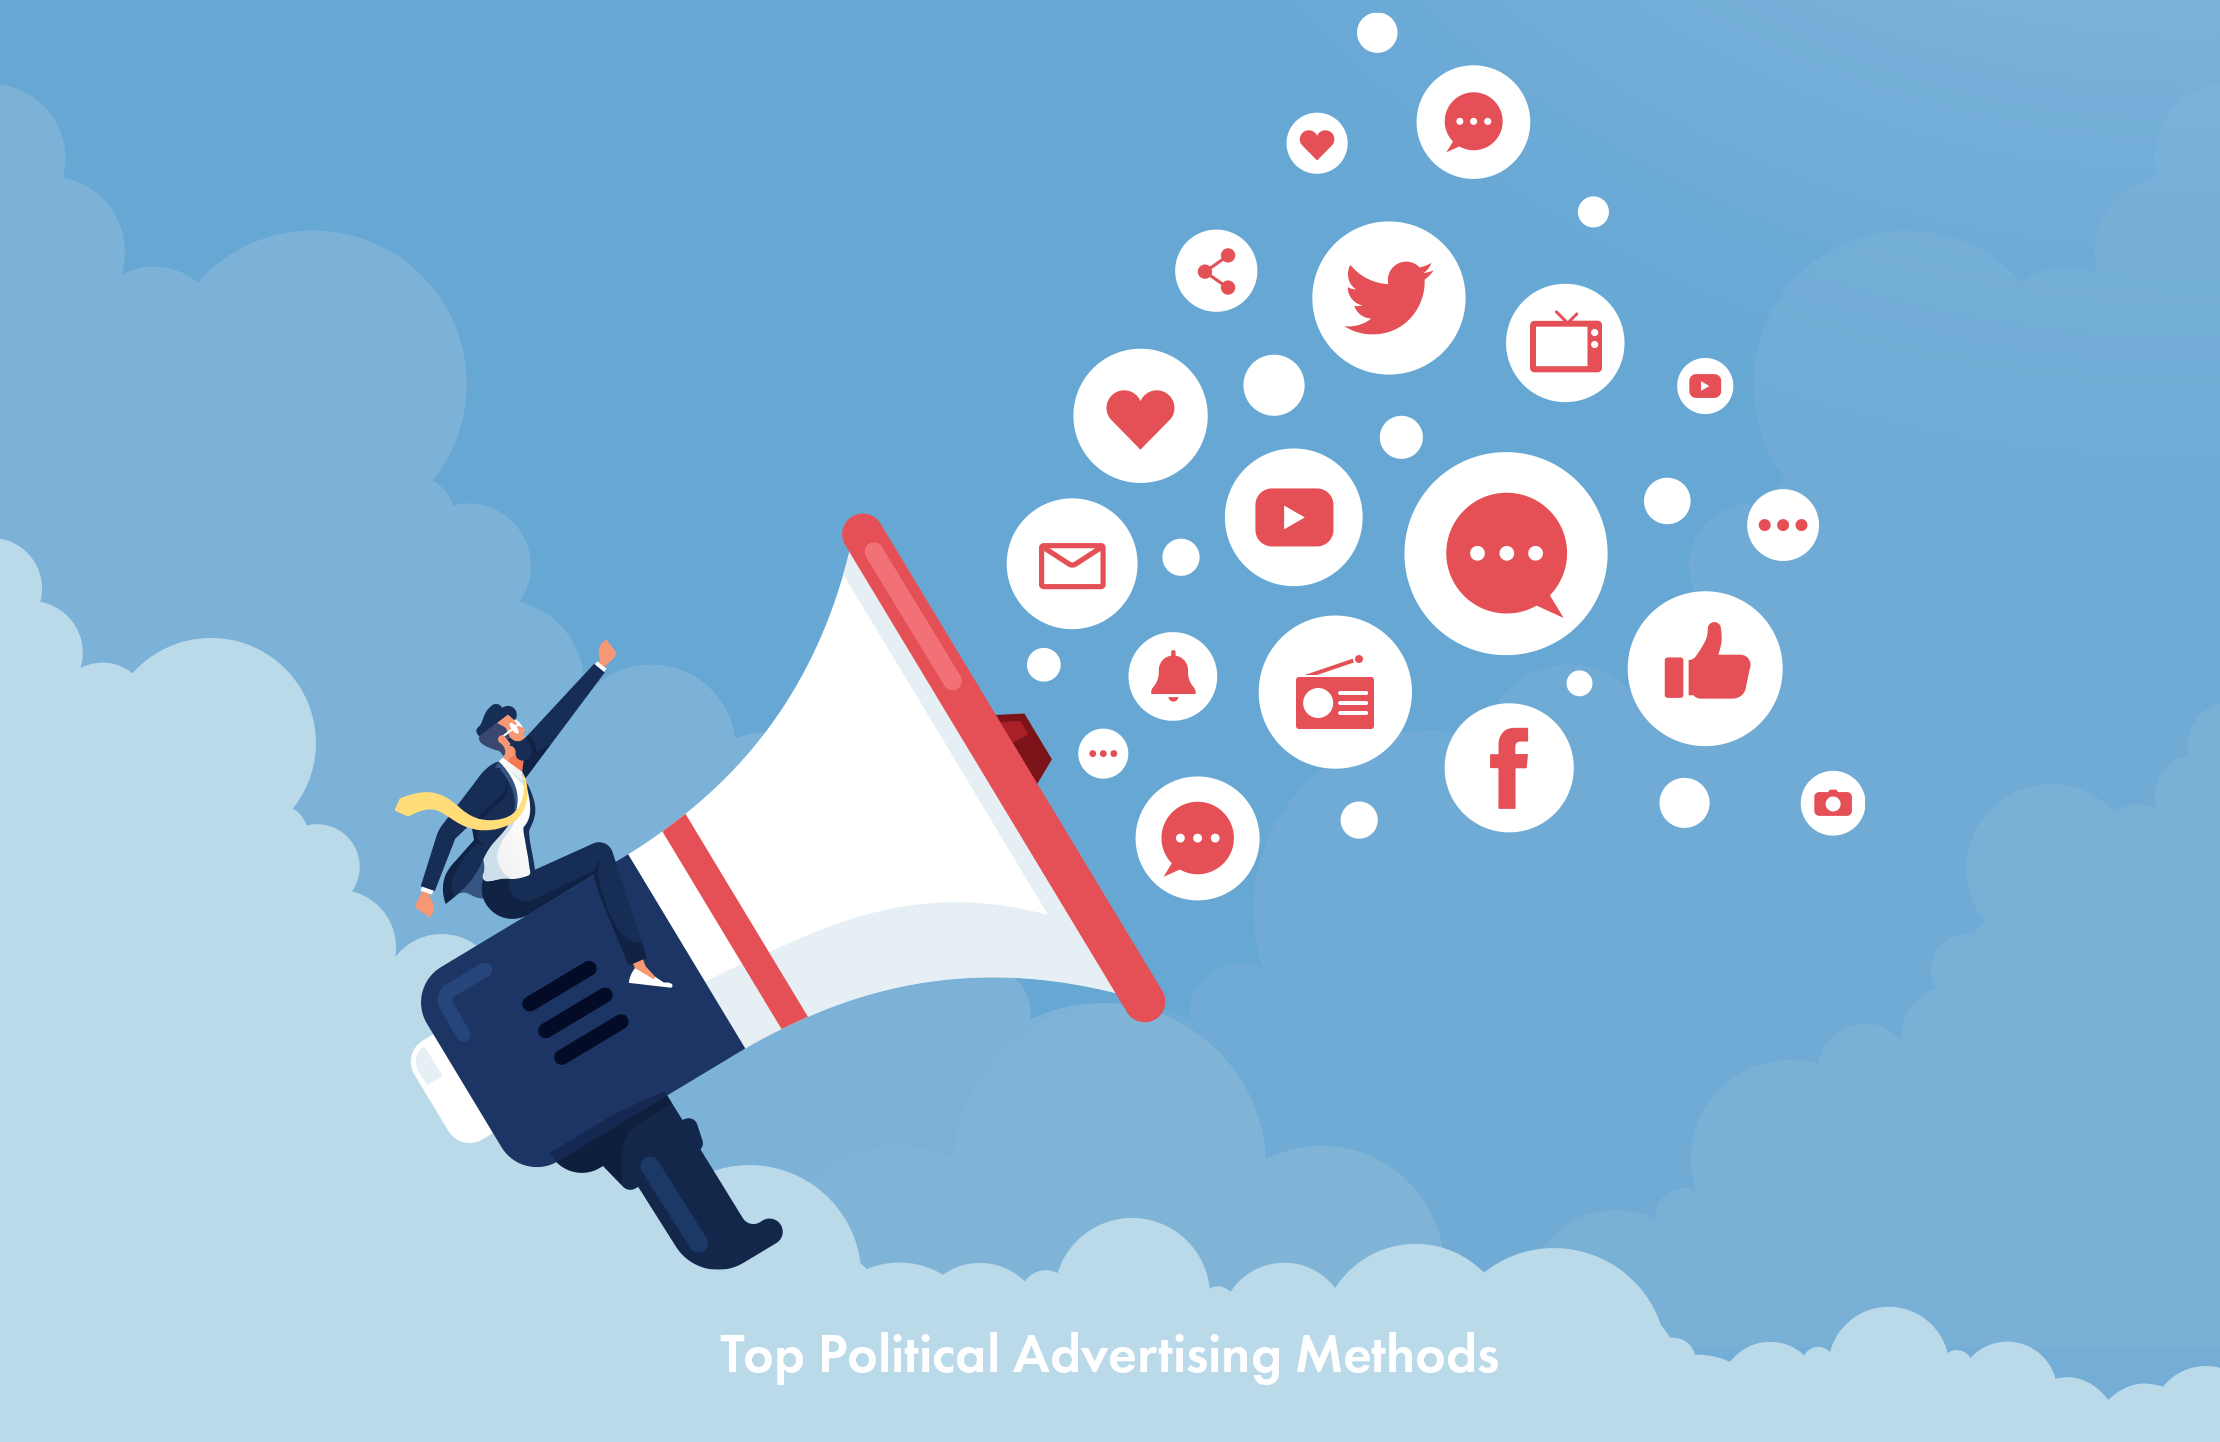 Political Advertising and How SMS Marketing Relates